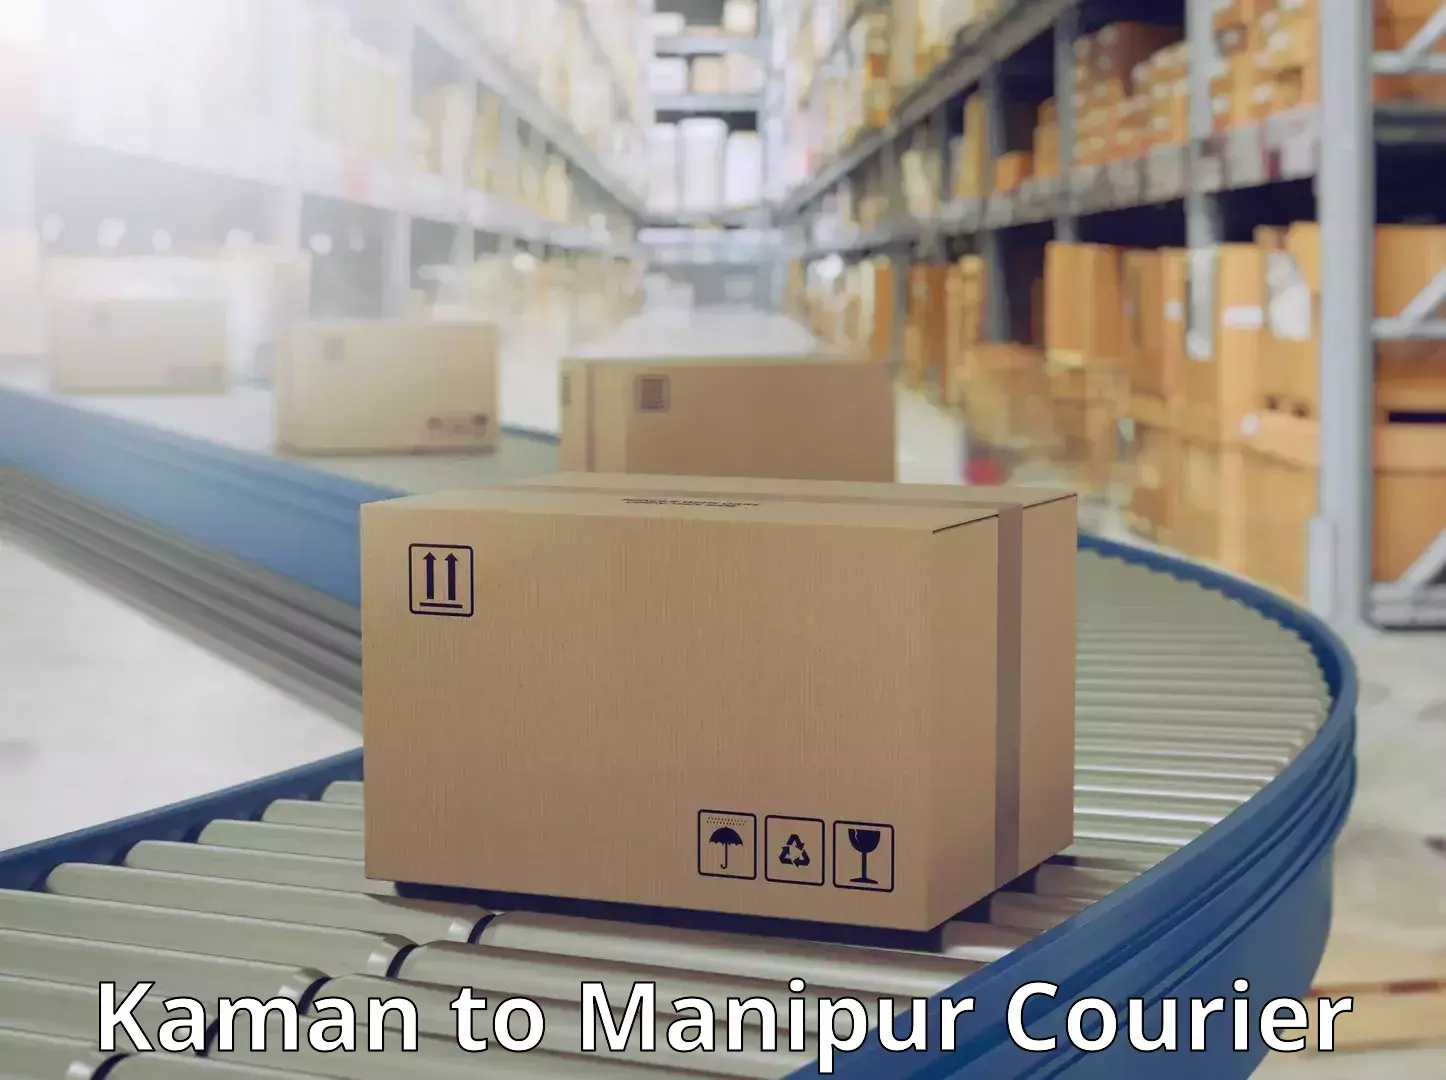 Same-day delivery solutions Kaman to Manipur